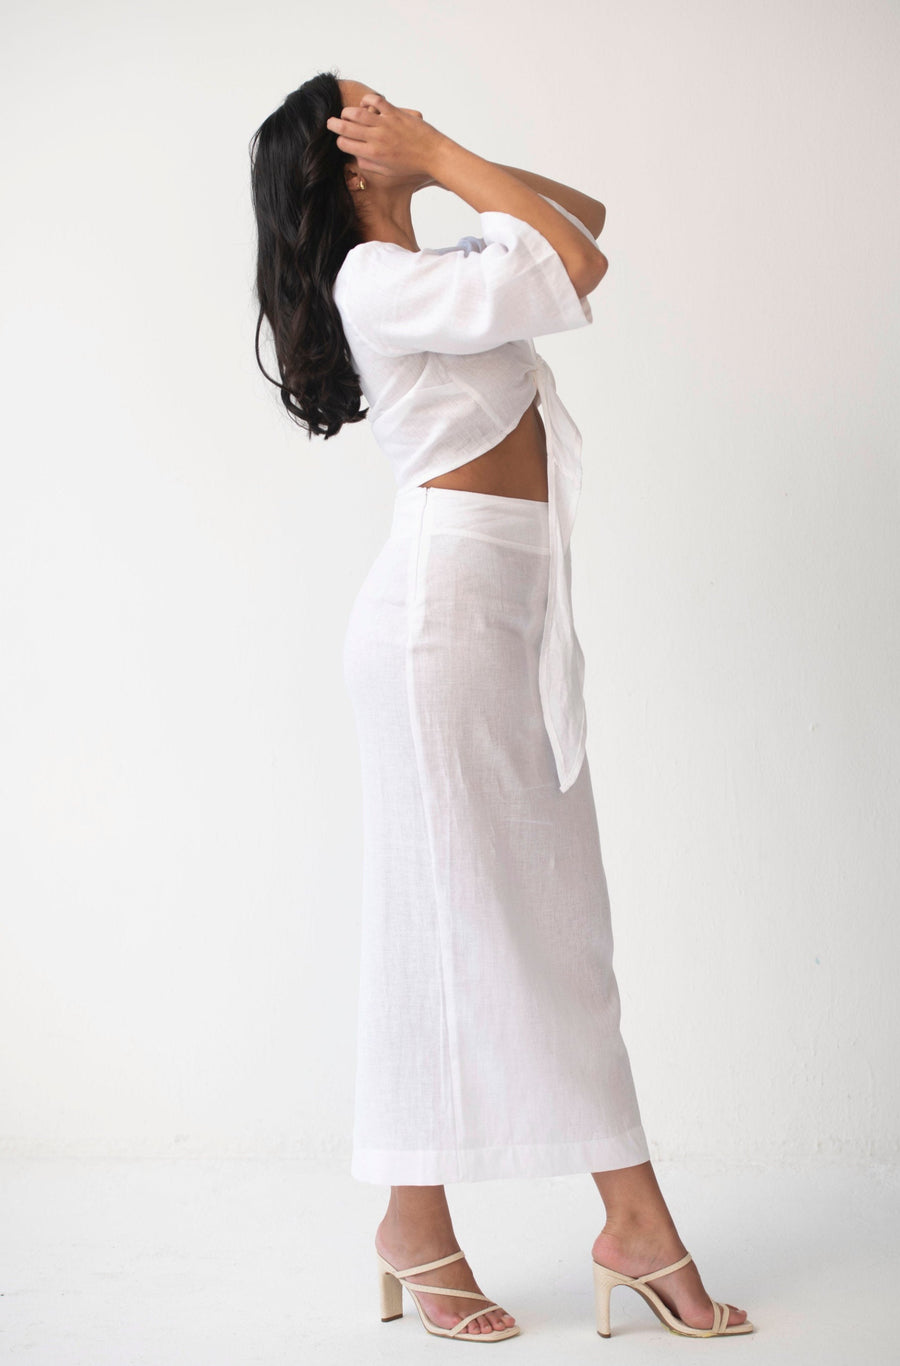 The Maxi Skirt in White